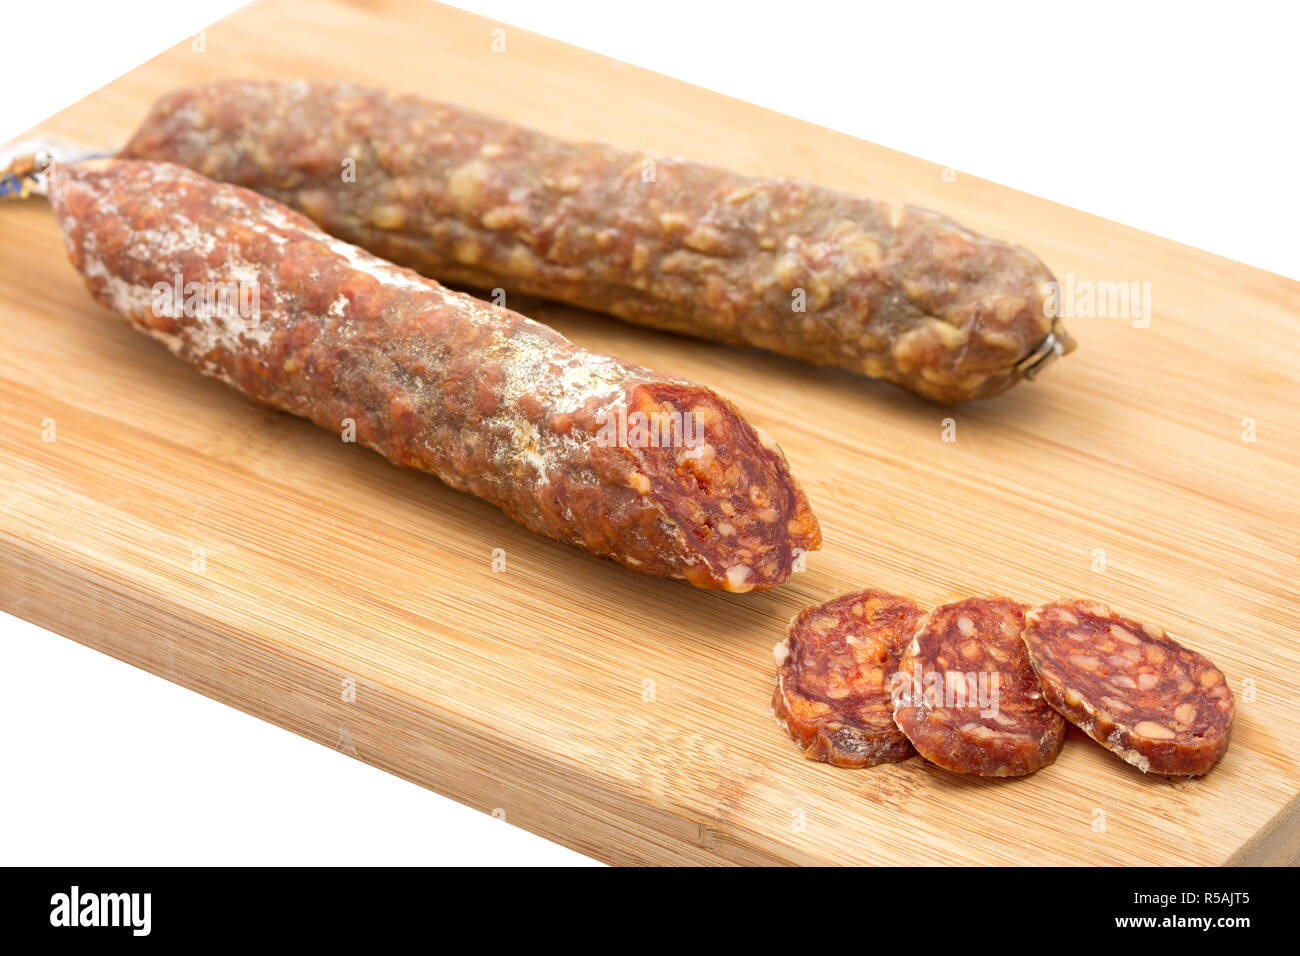 french salami on wooden board Stock Photo